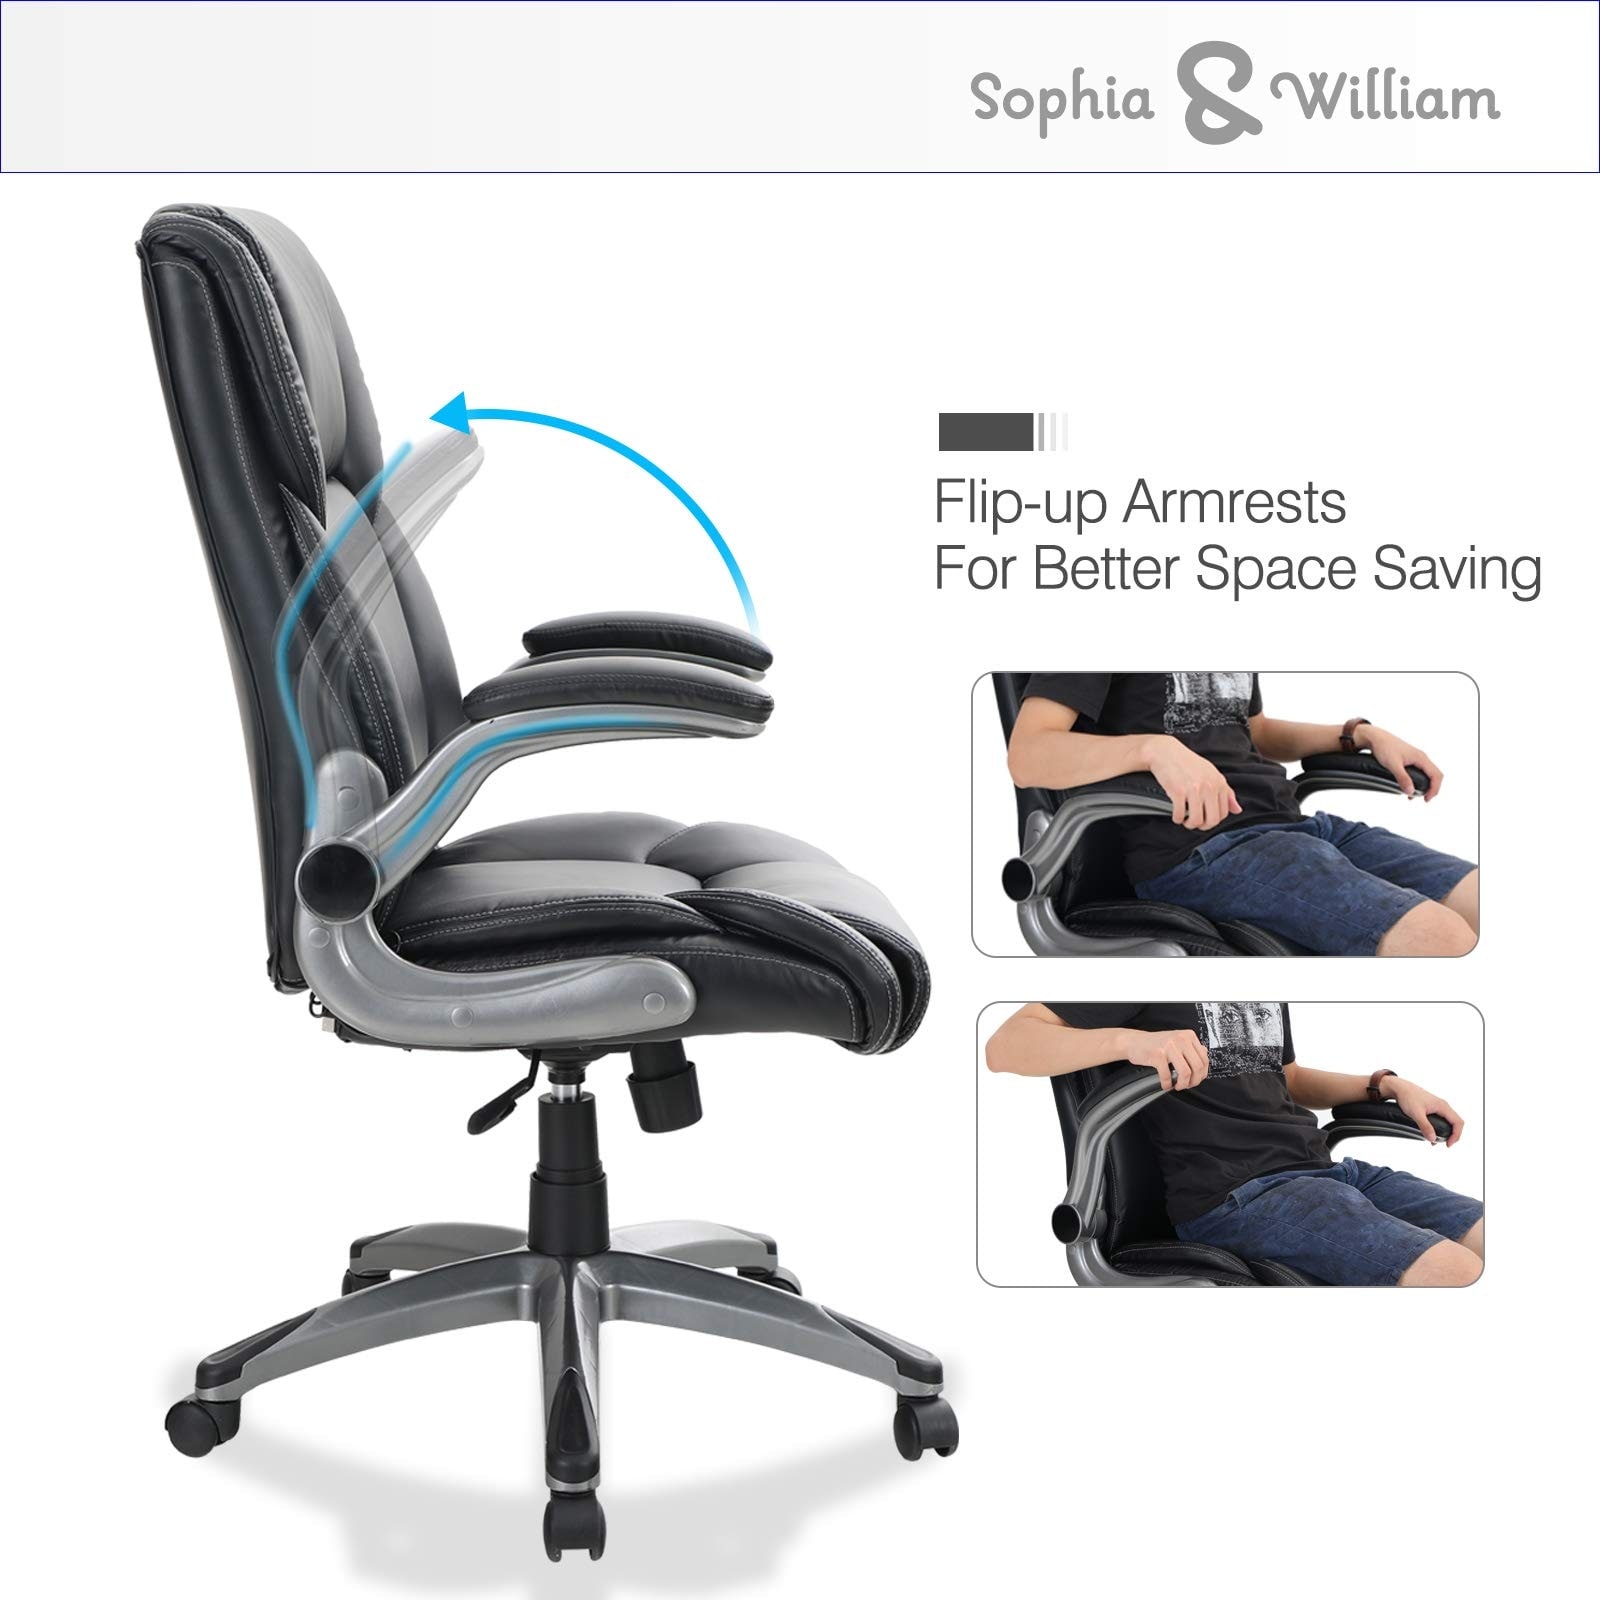 Sophia & William Leather Ergonomic Office Desk Chair 360-deg Swivel, High  Back Executive Computer Chair with Flip-up Armrests - Overstock - 32440398